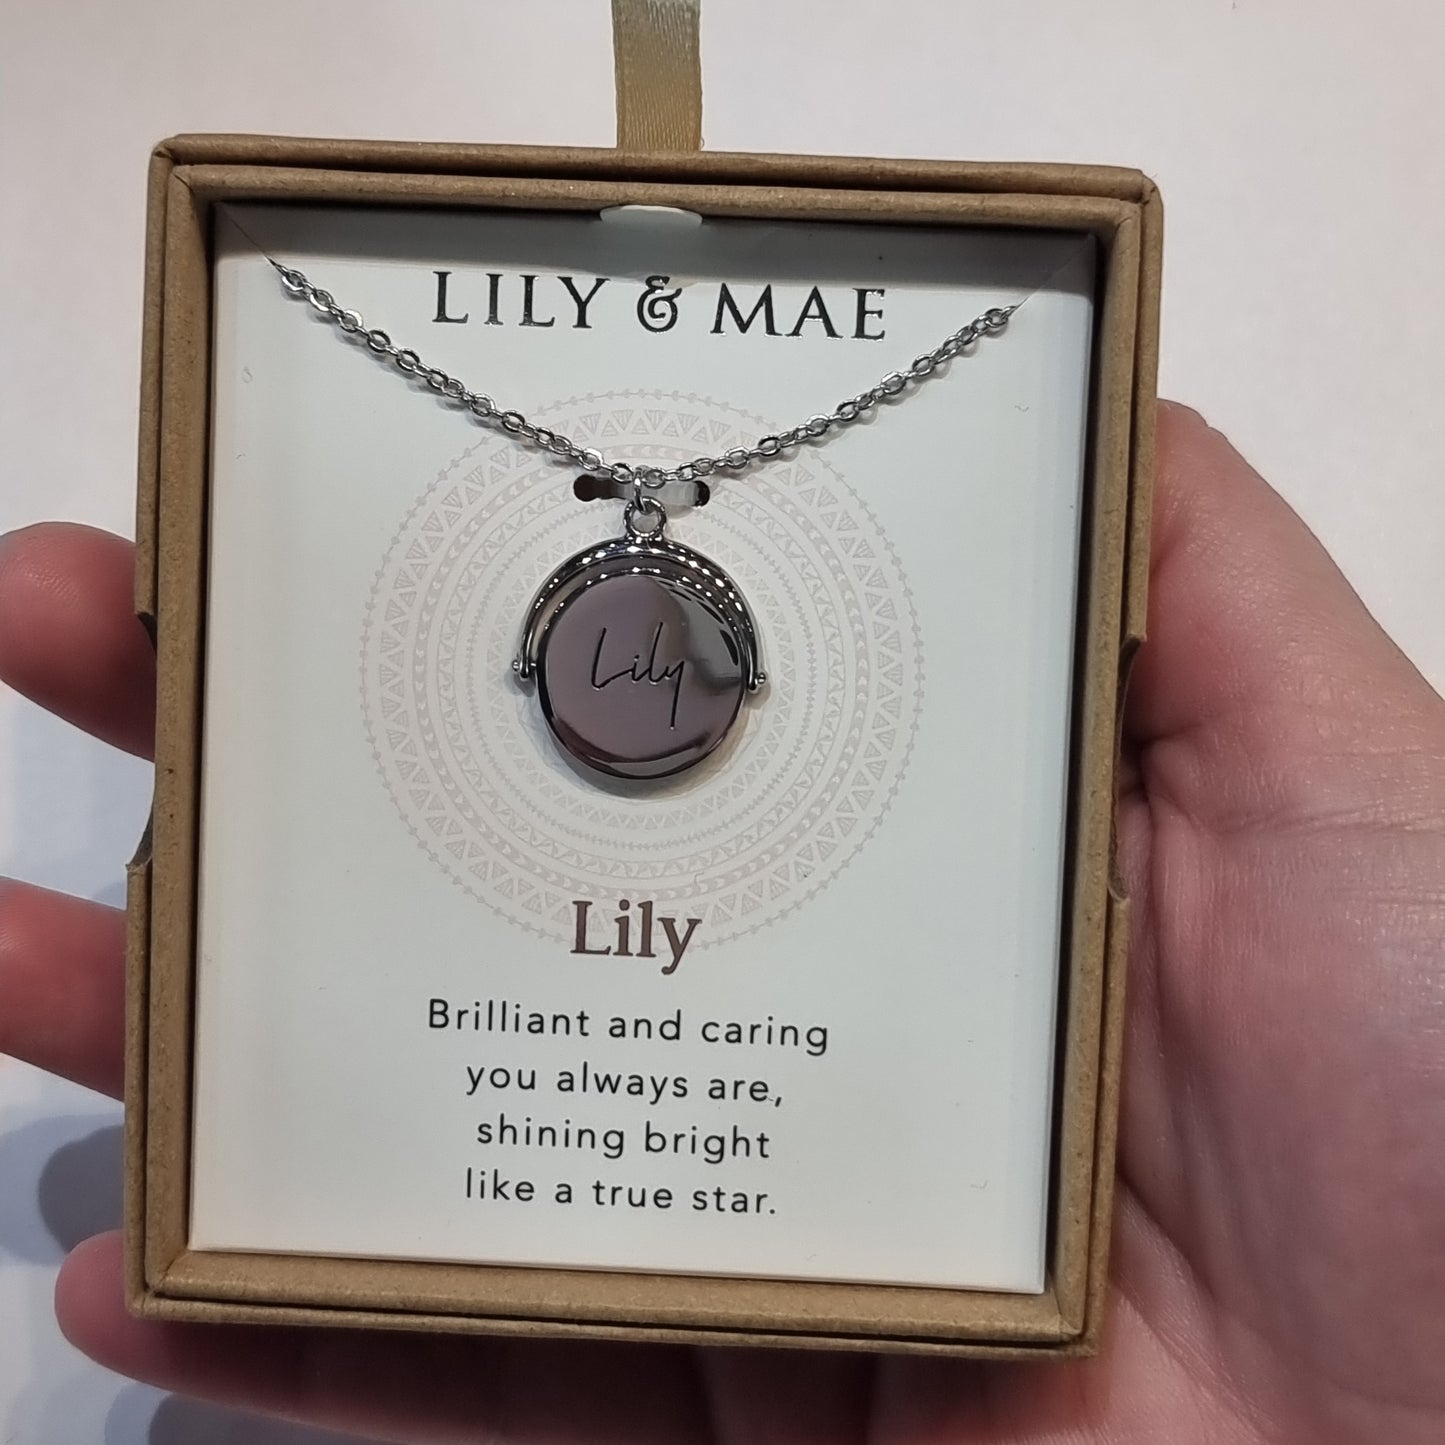 L&M spinning necklace - Lily - Rivendell Shop